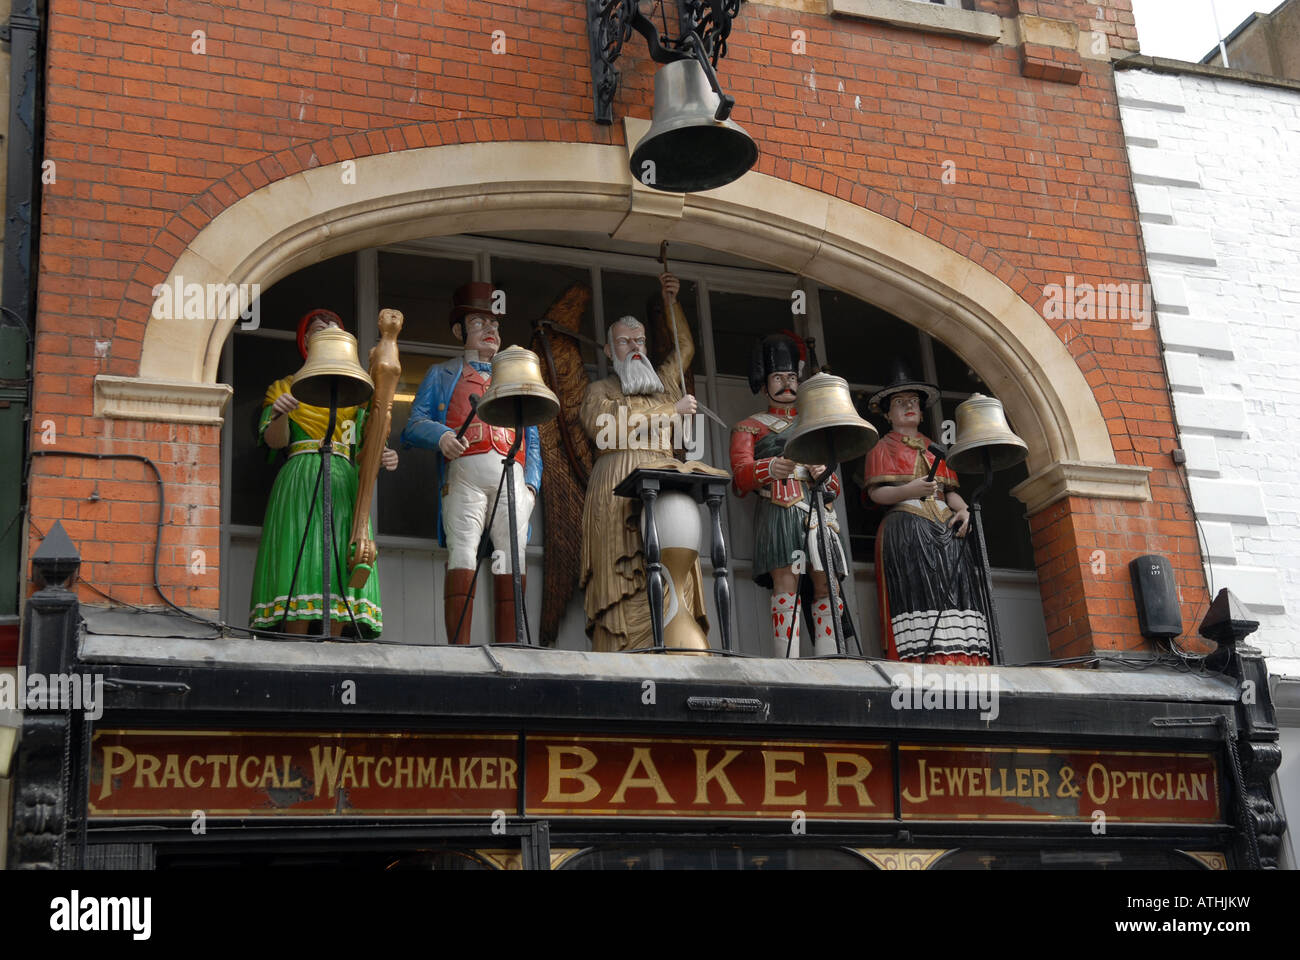 Clock and figures over Bakers jewellers in Southgate in city of Gloucester, England. Stock Photo